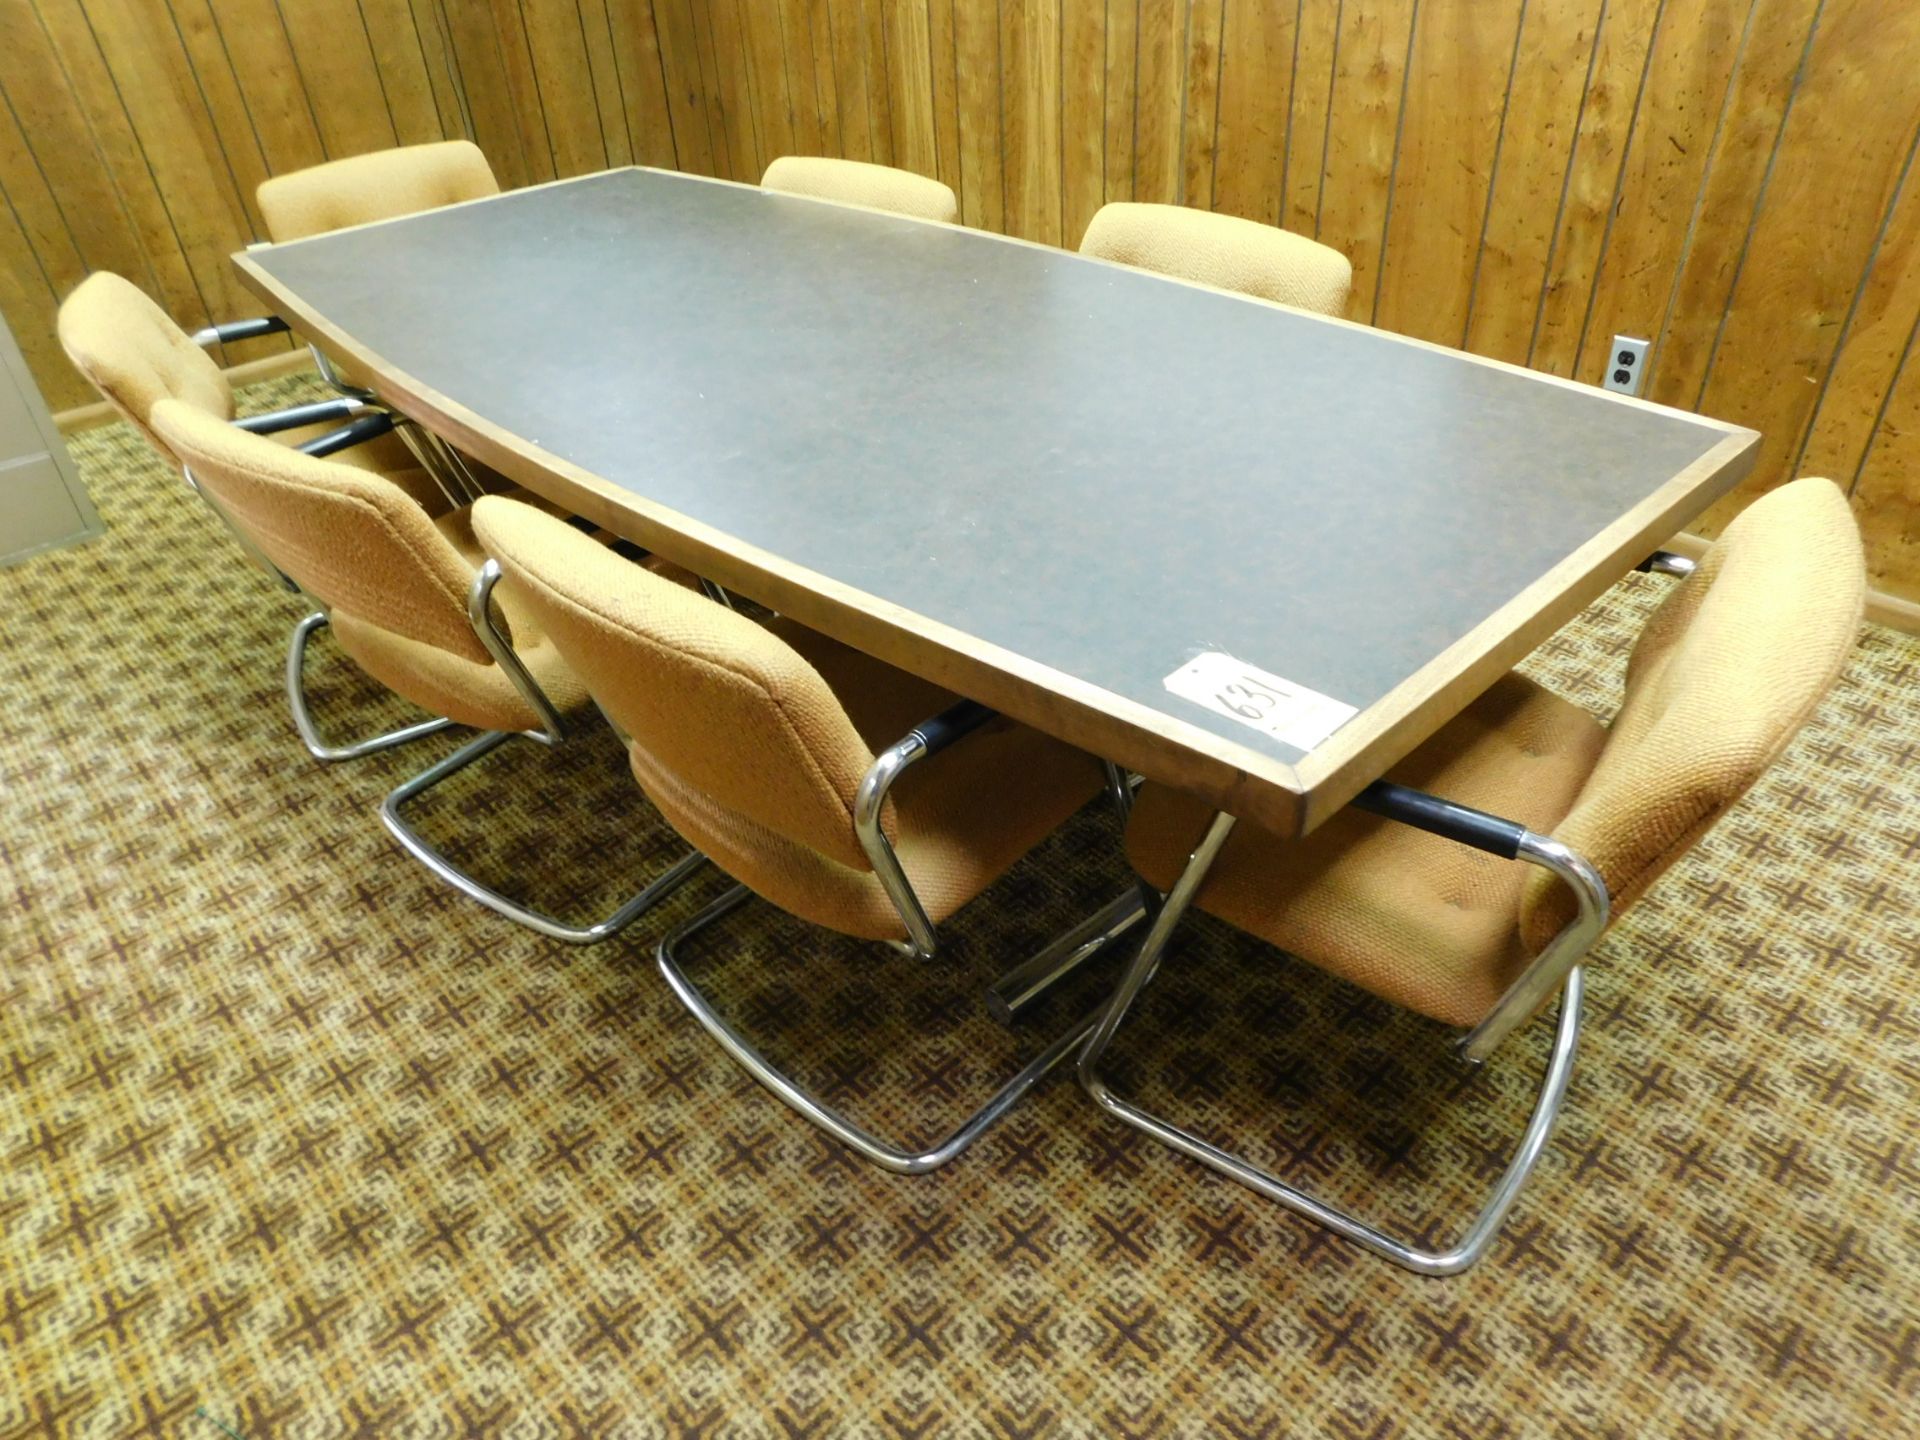 Conference Table and Chairs, 8' X 42", Boat Shaped